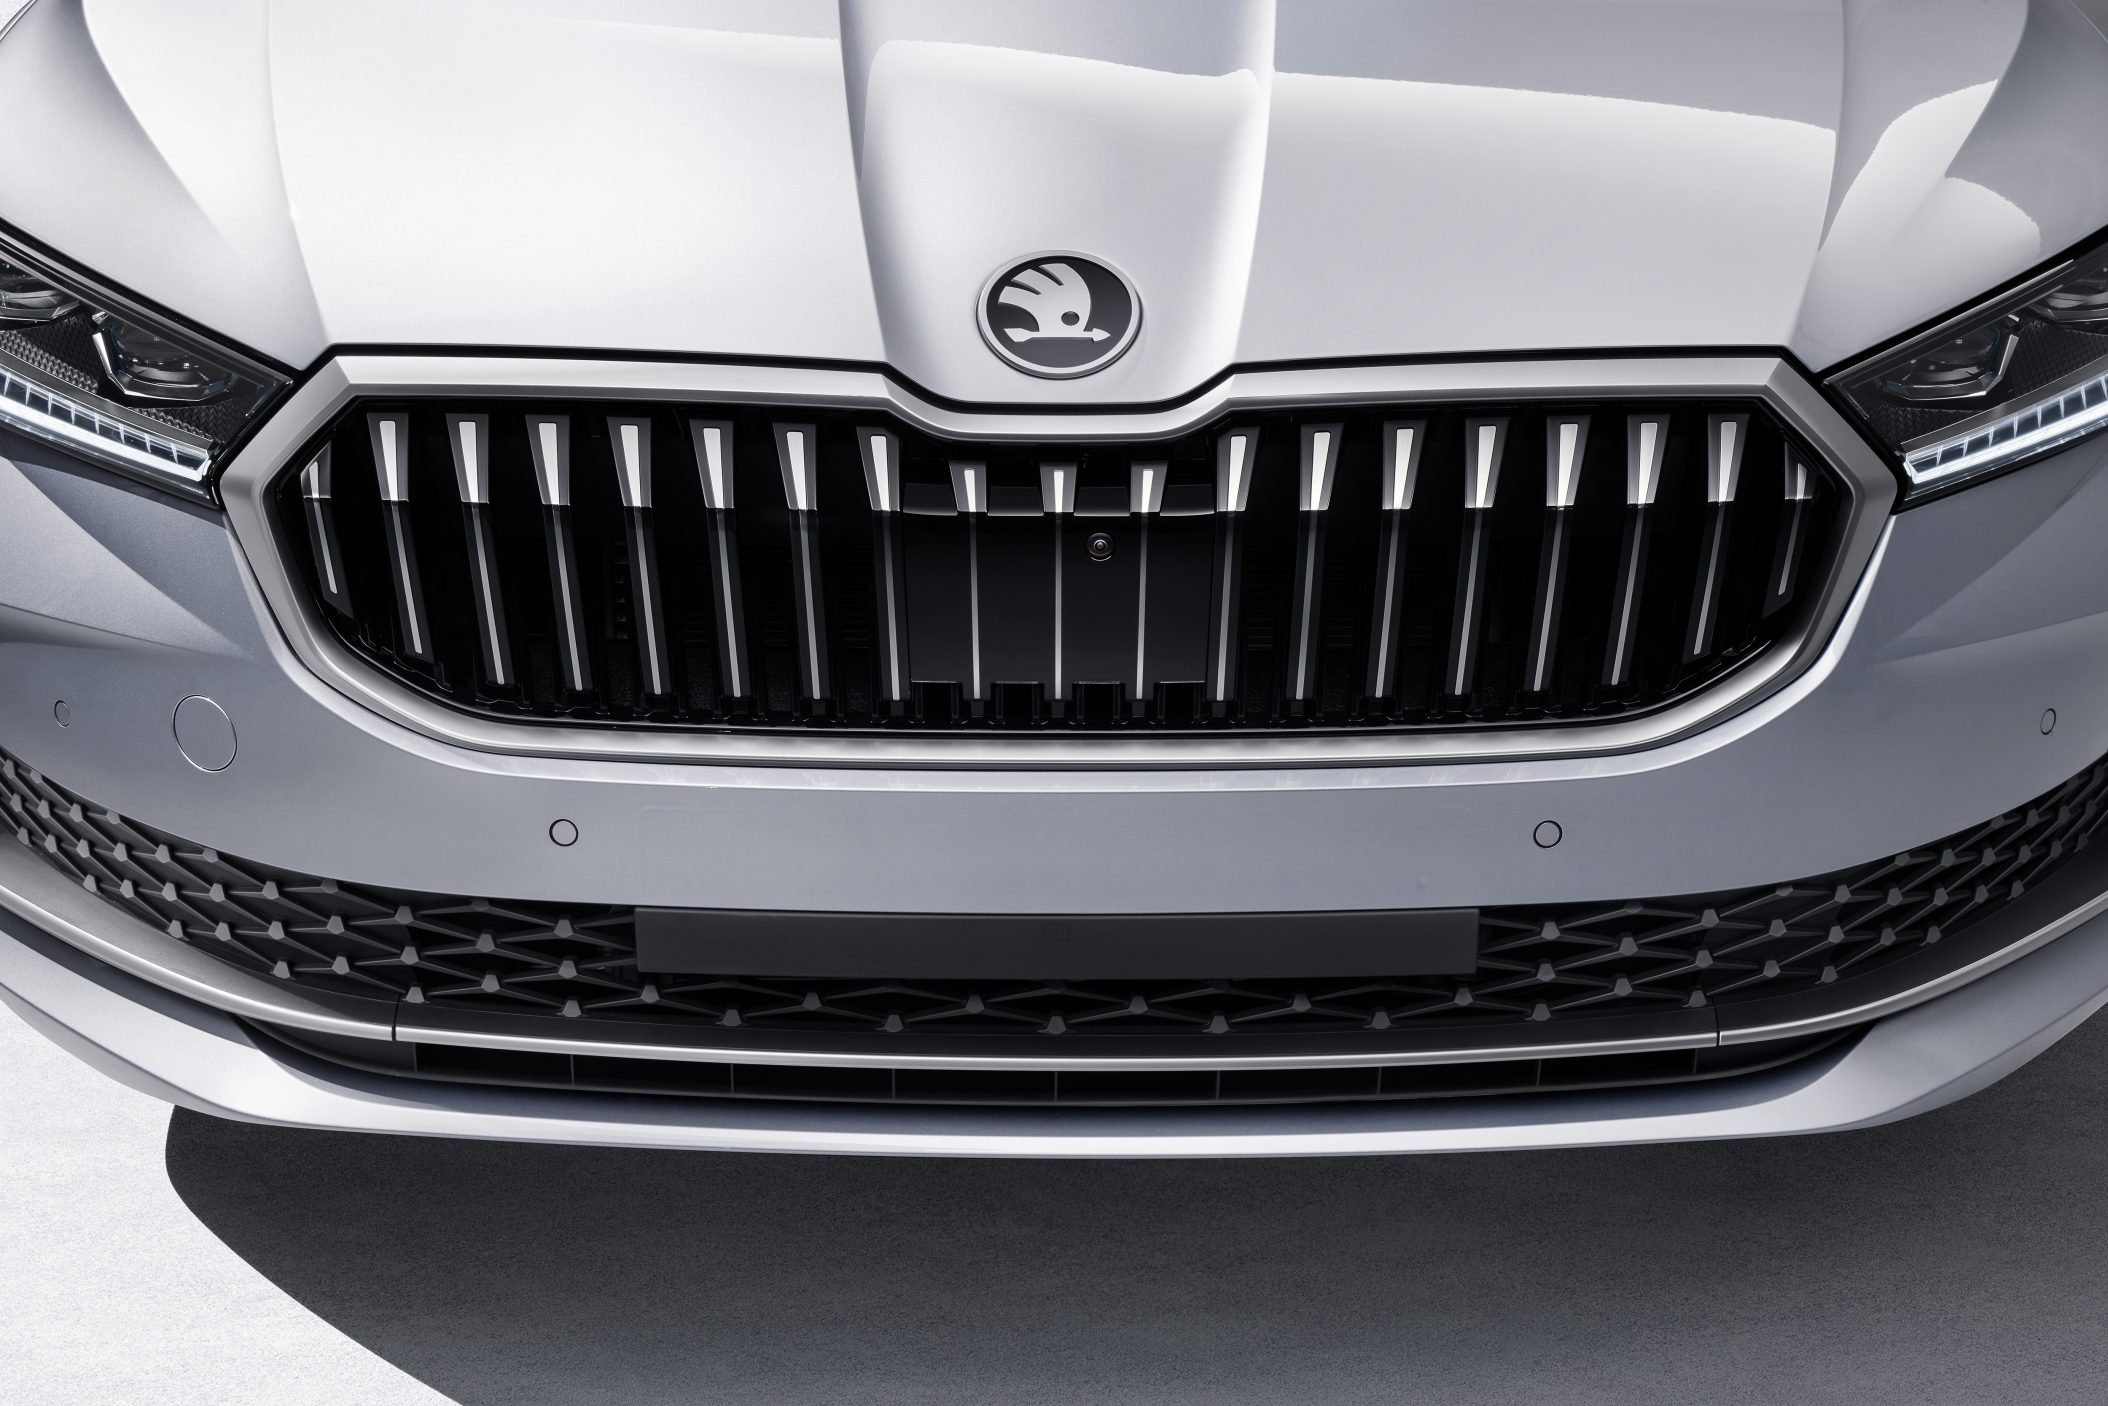 ŠKODA SUPERB with the new equipment for even better comfort and